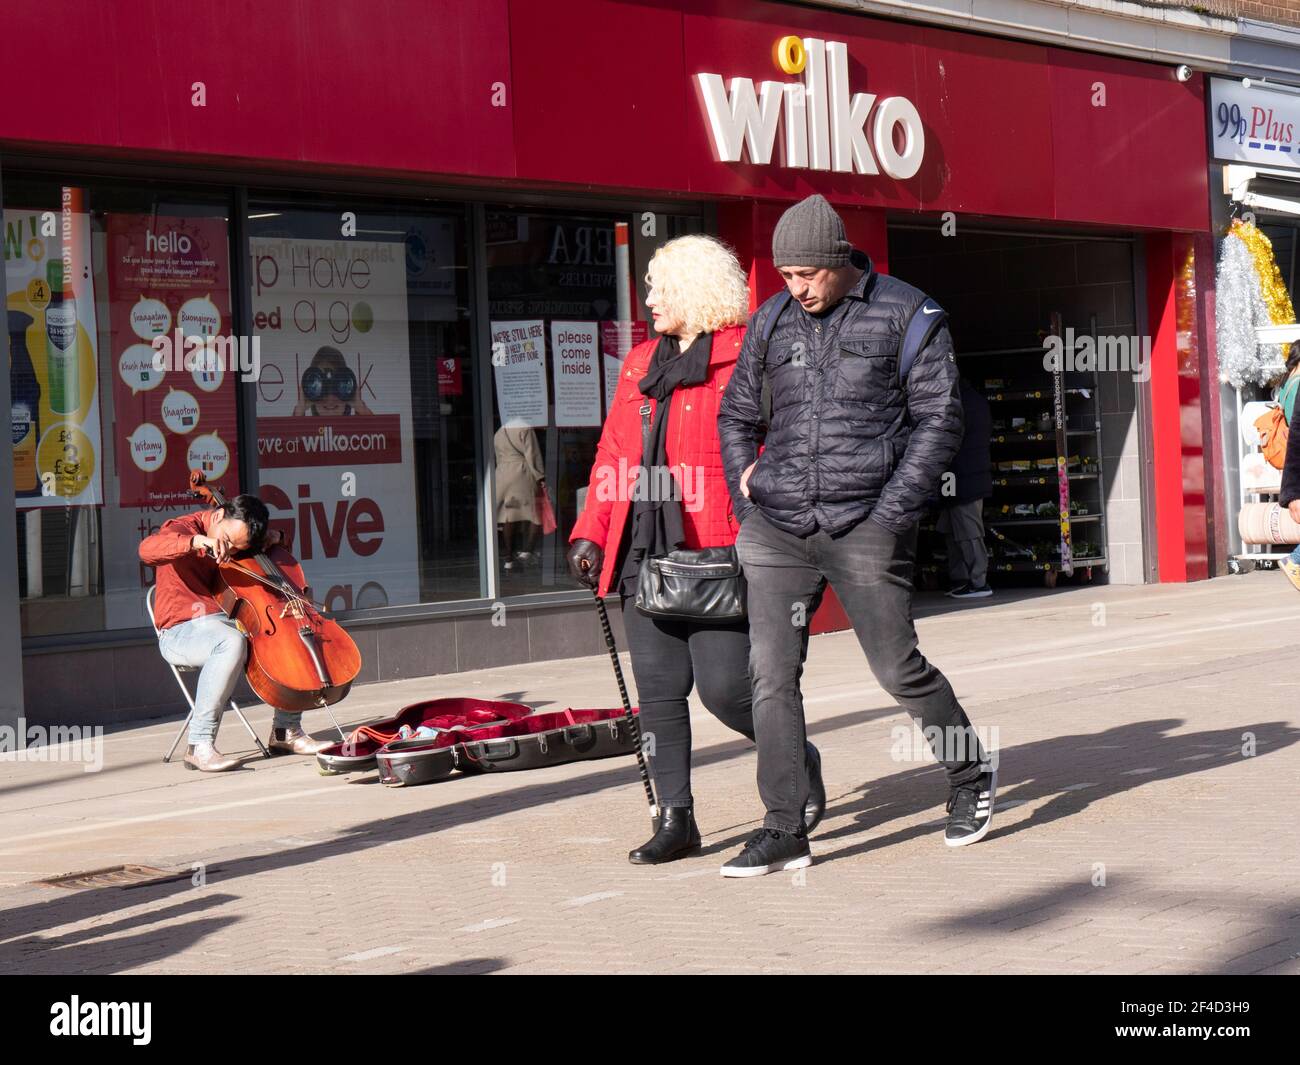 Wilko store shop with shoppers Walthamstow High Street, Waltham Forest, London, with busker playing the cello Stock Photo